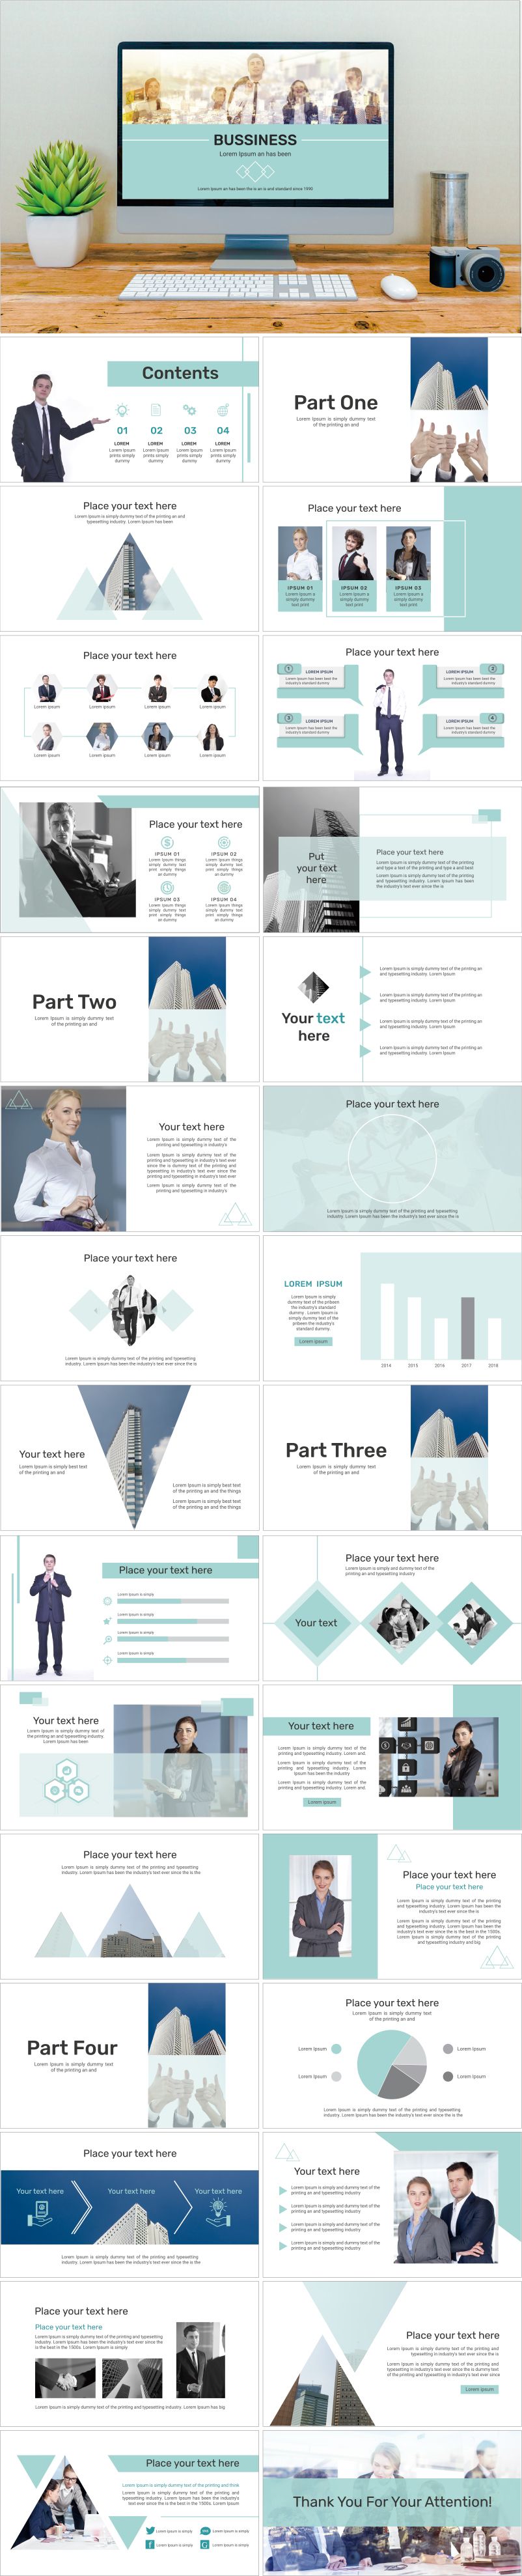 PowerPoint template vol.28